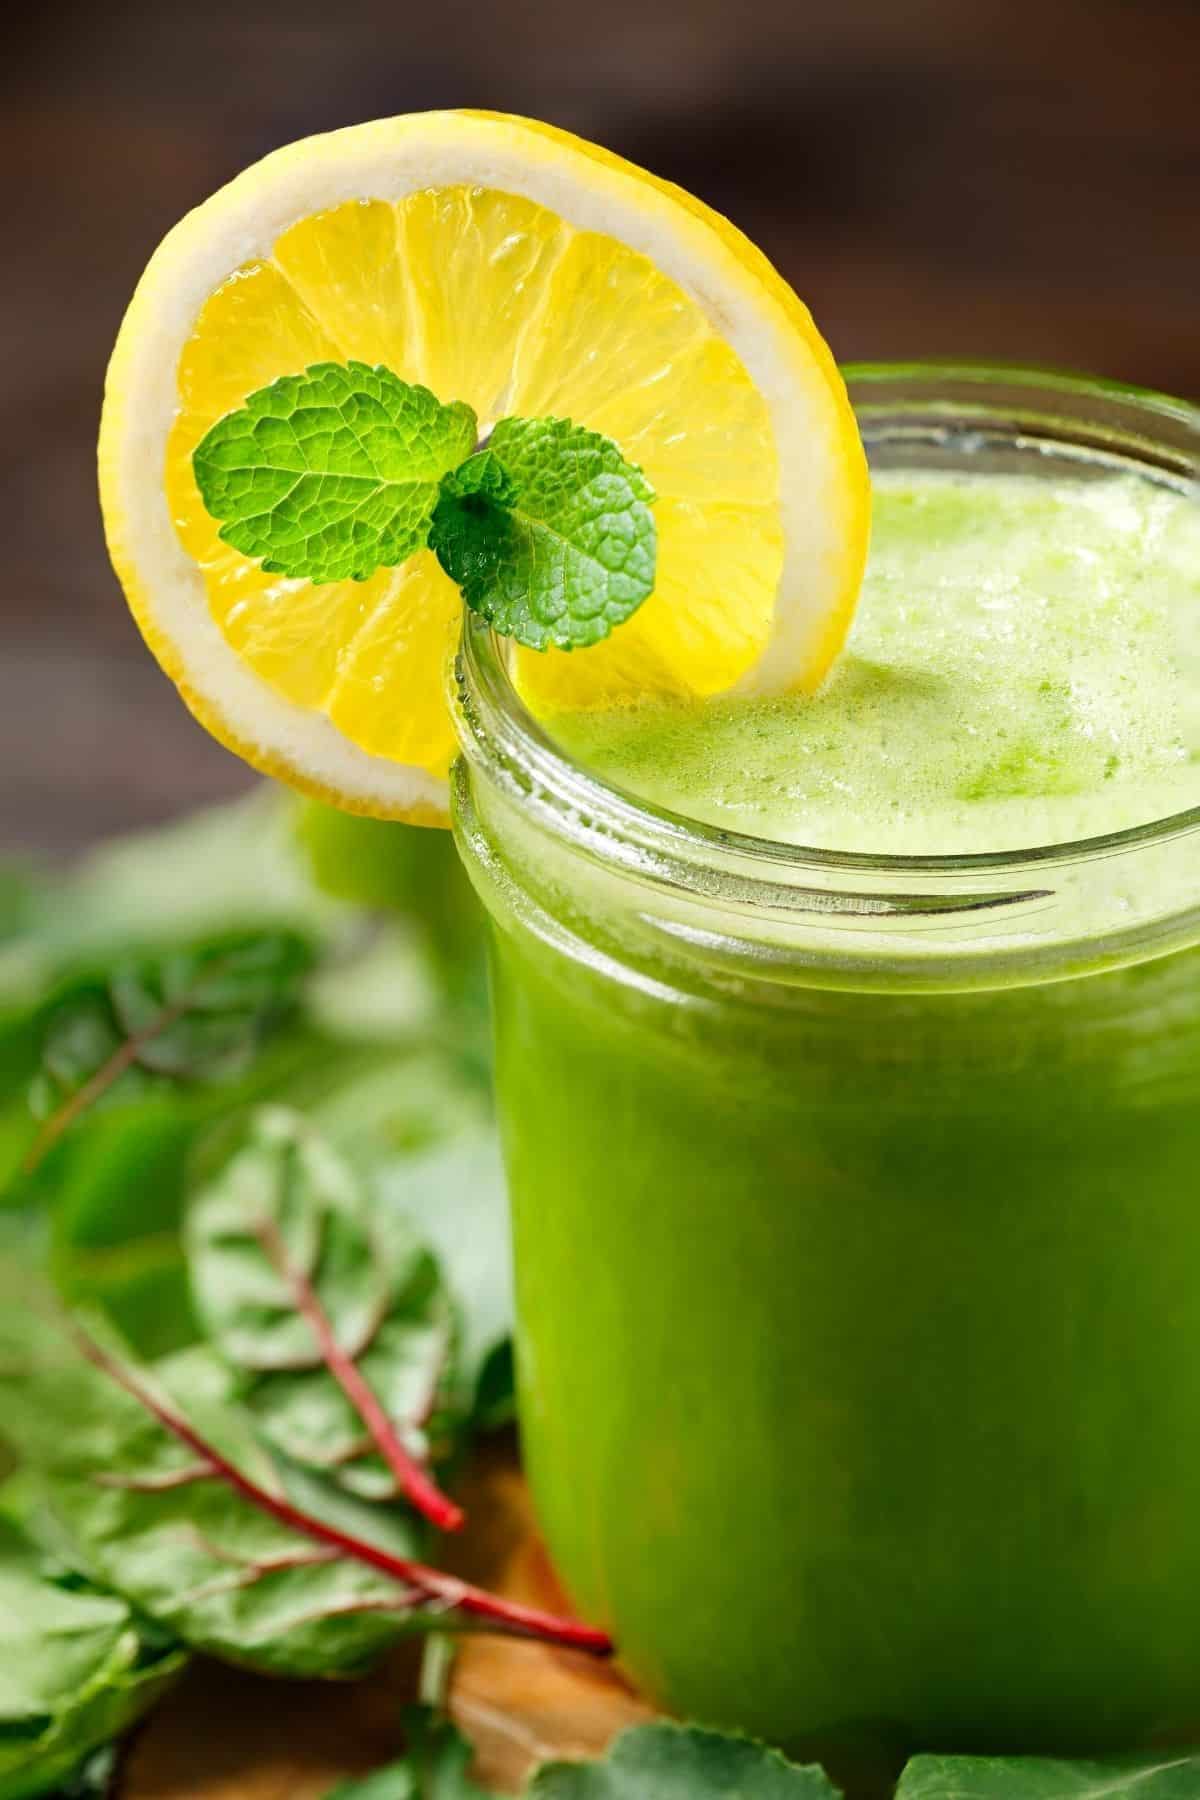 green juice with a slice of lemon on the glass.